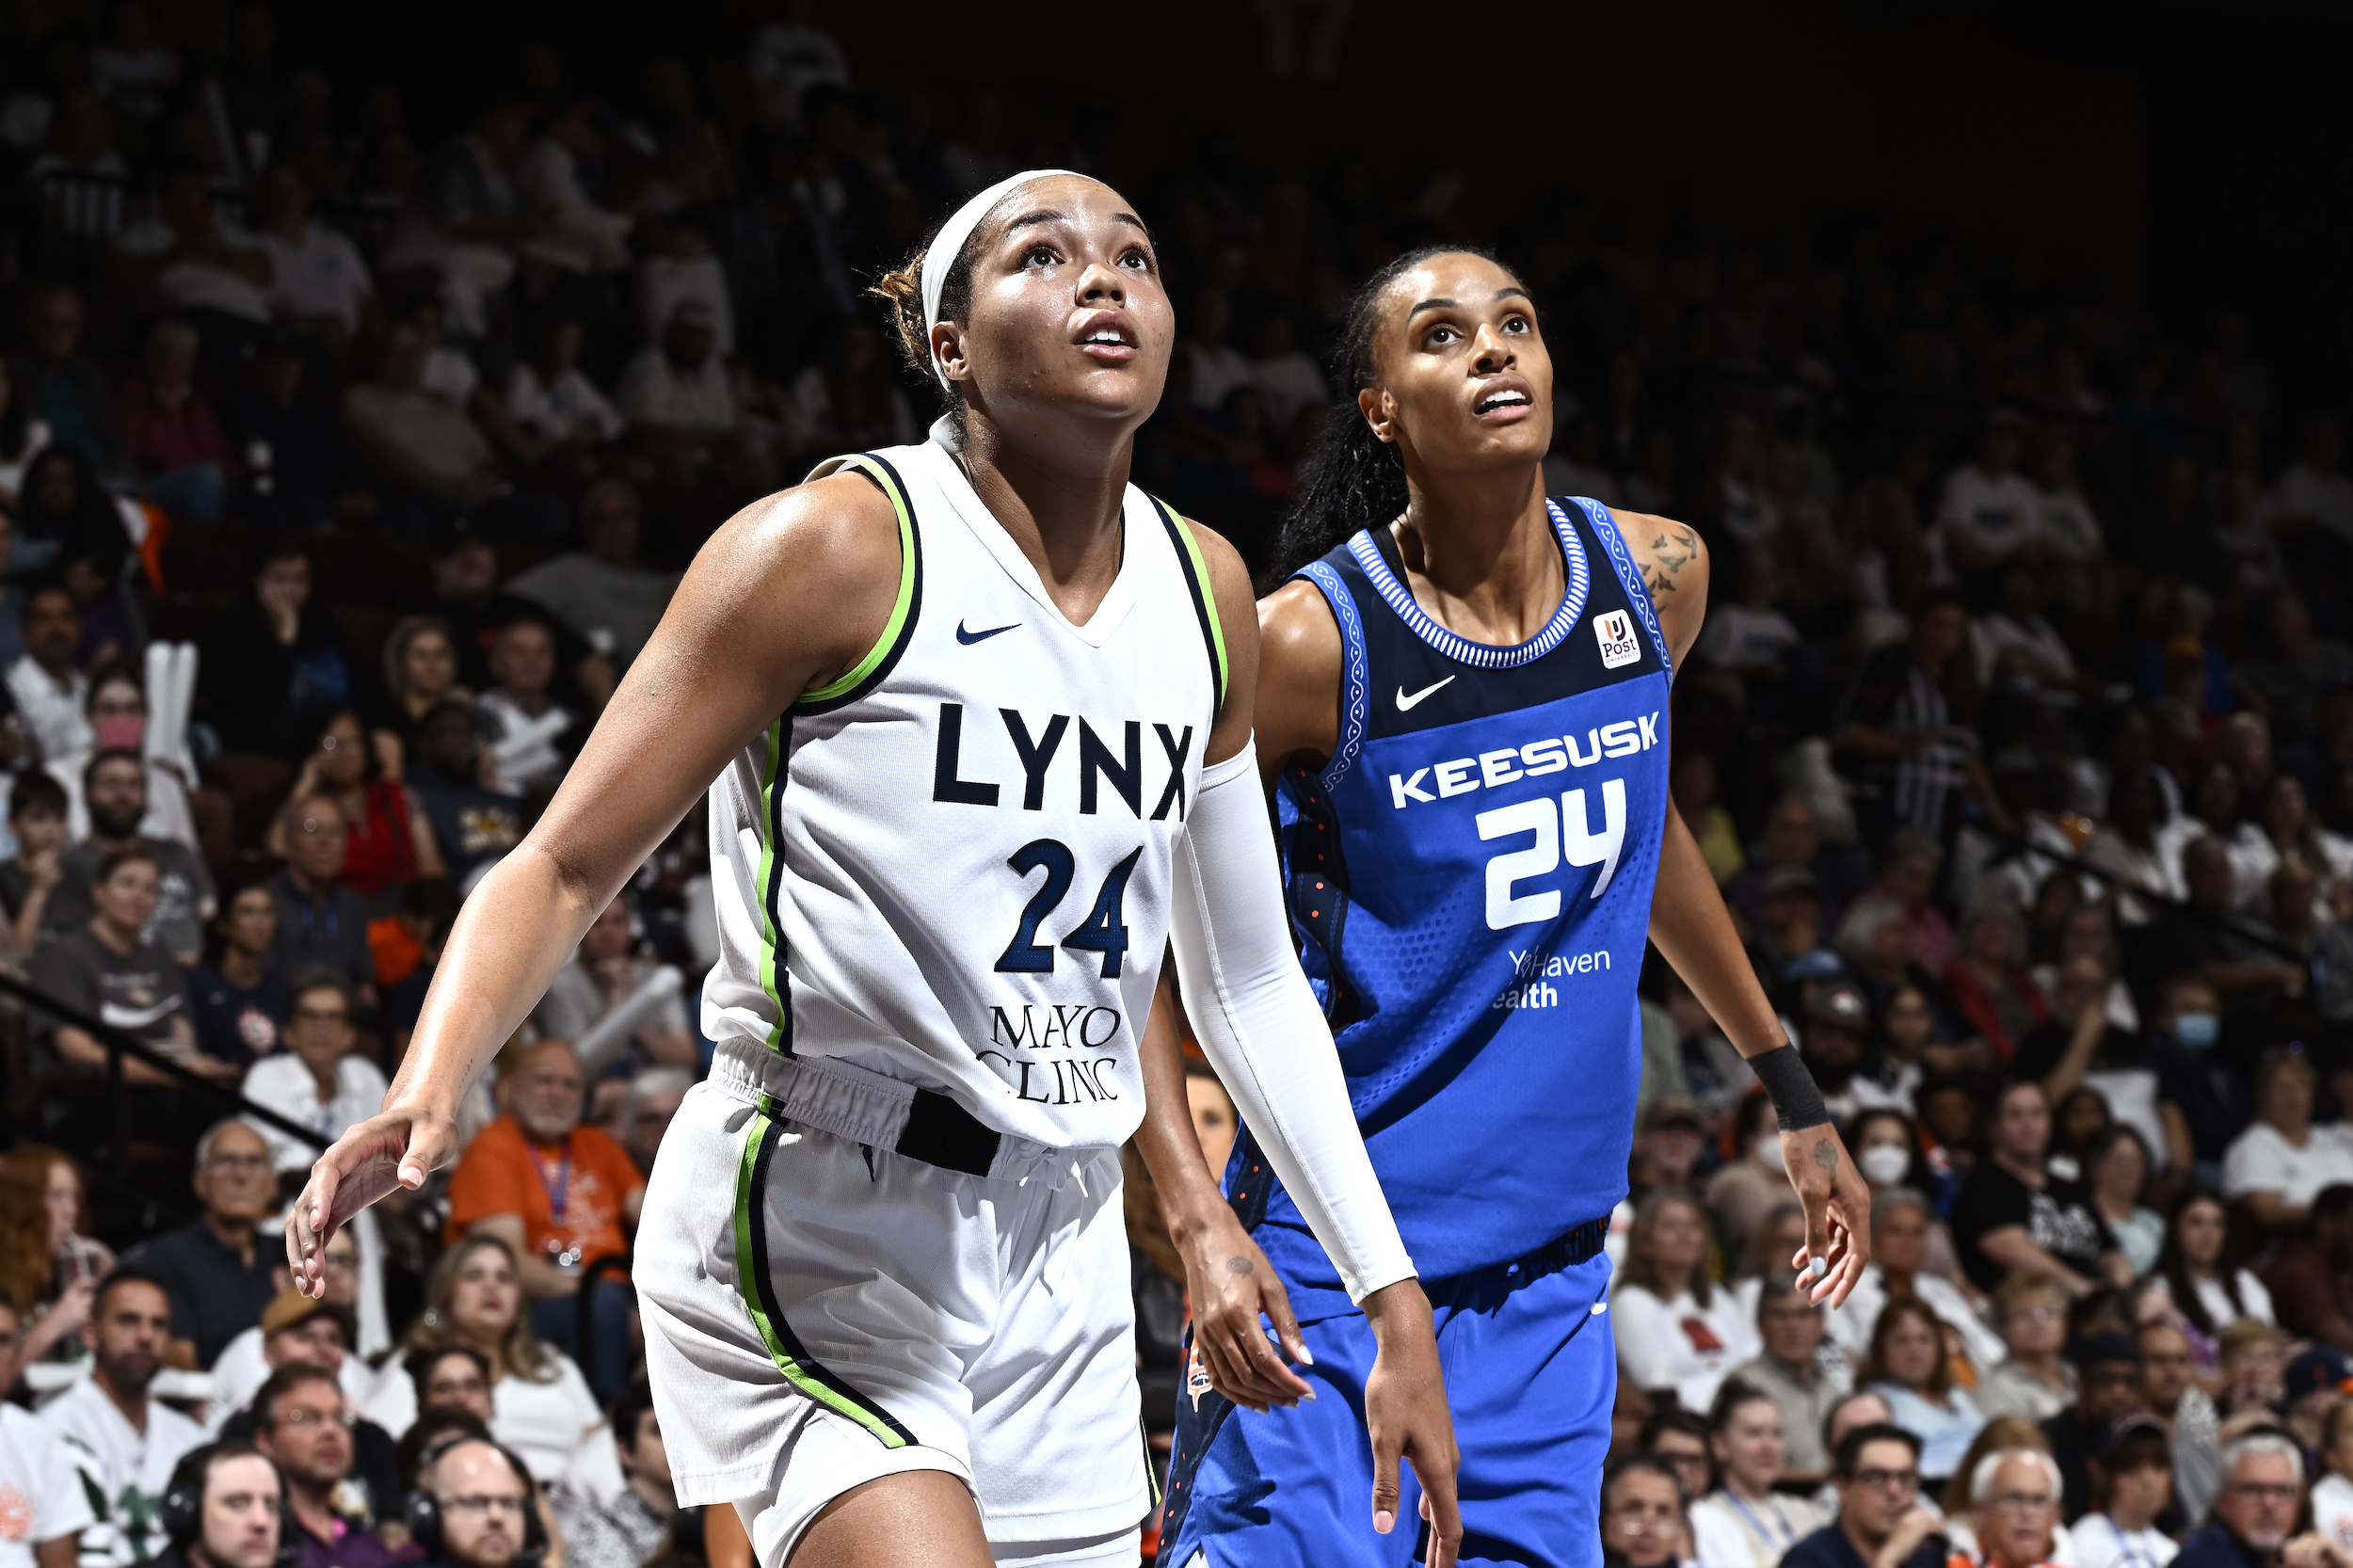 Napheesa Collier #24 of the Minnesota Lynx and DeWanna Bonner #24 of the Connecticut Sun looks on during the game on September 17, 2023 at the Mohegan Sun Arena in Uncasville, Connecticut.